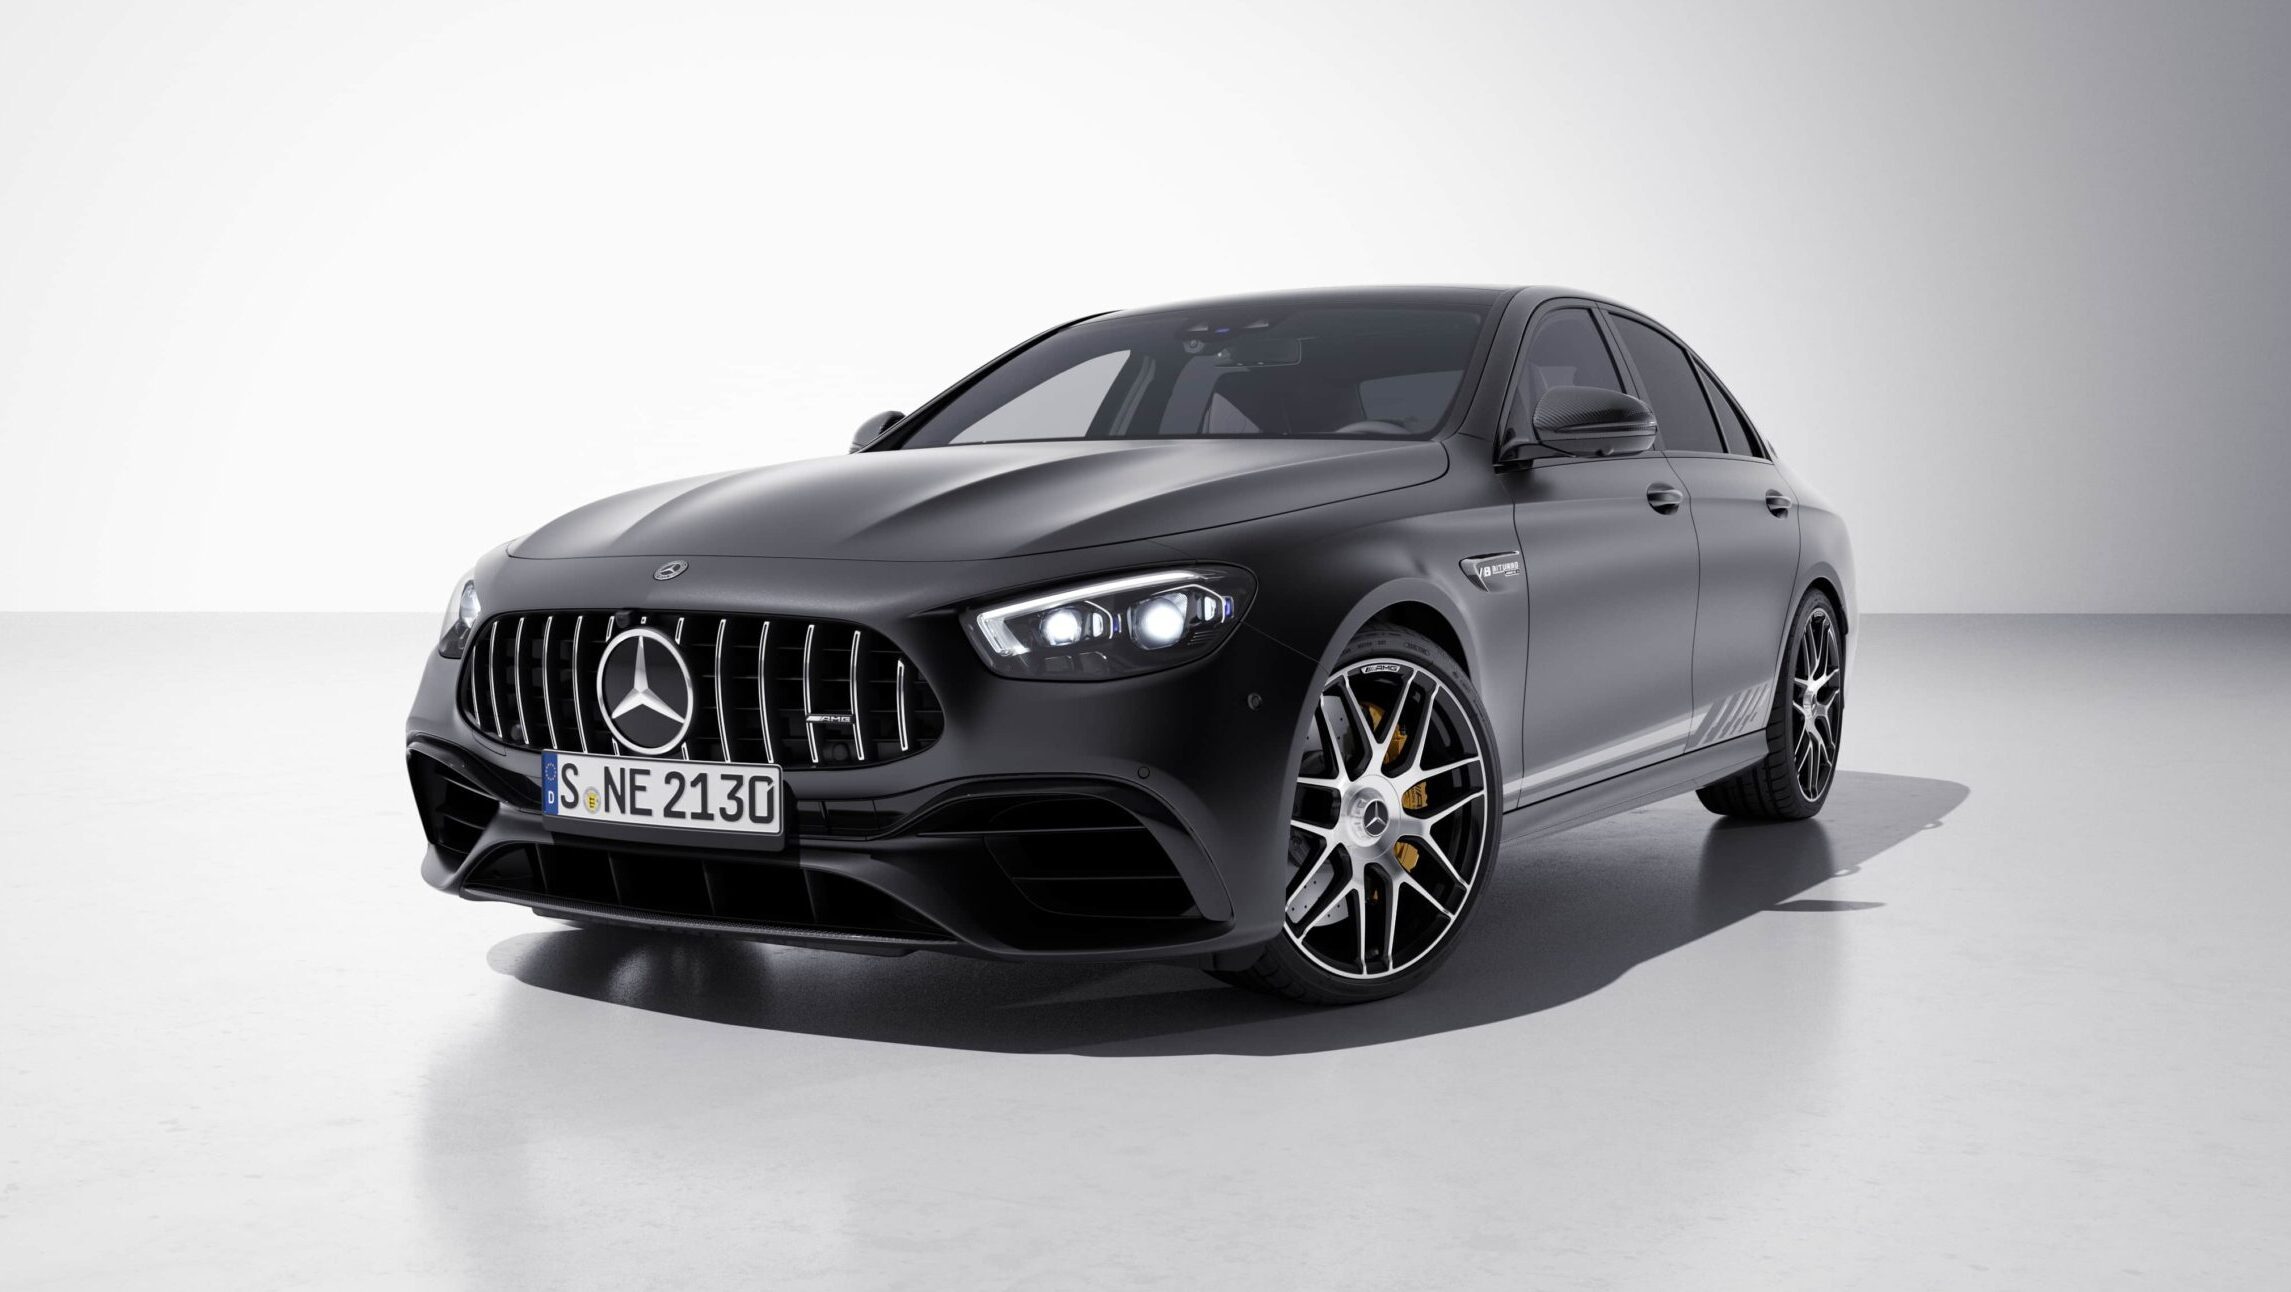 Mercedes-AMG Final Editions to see off V8 models 